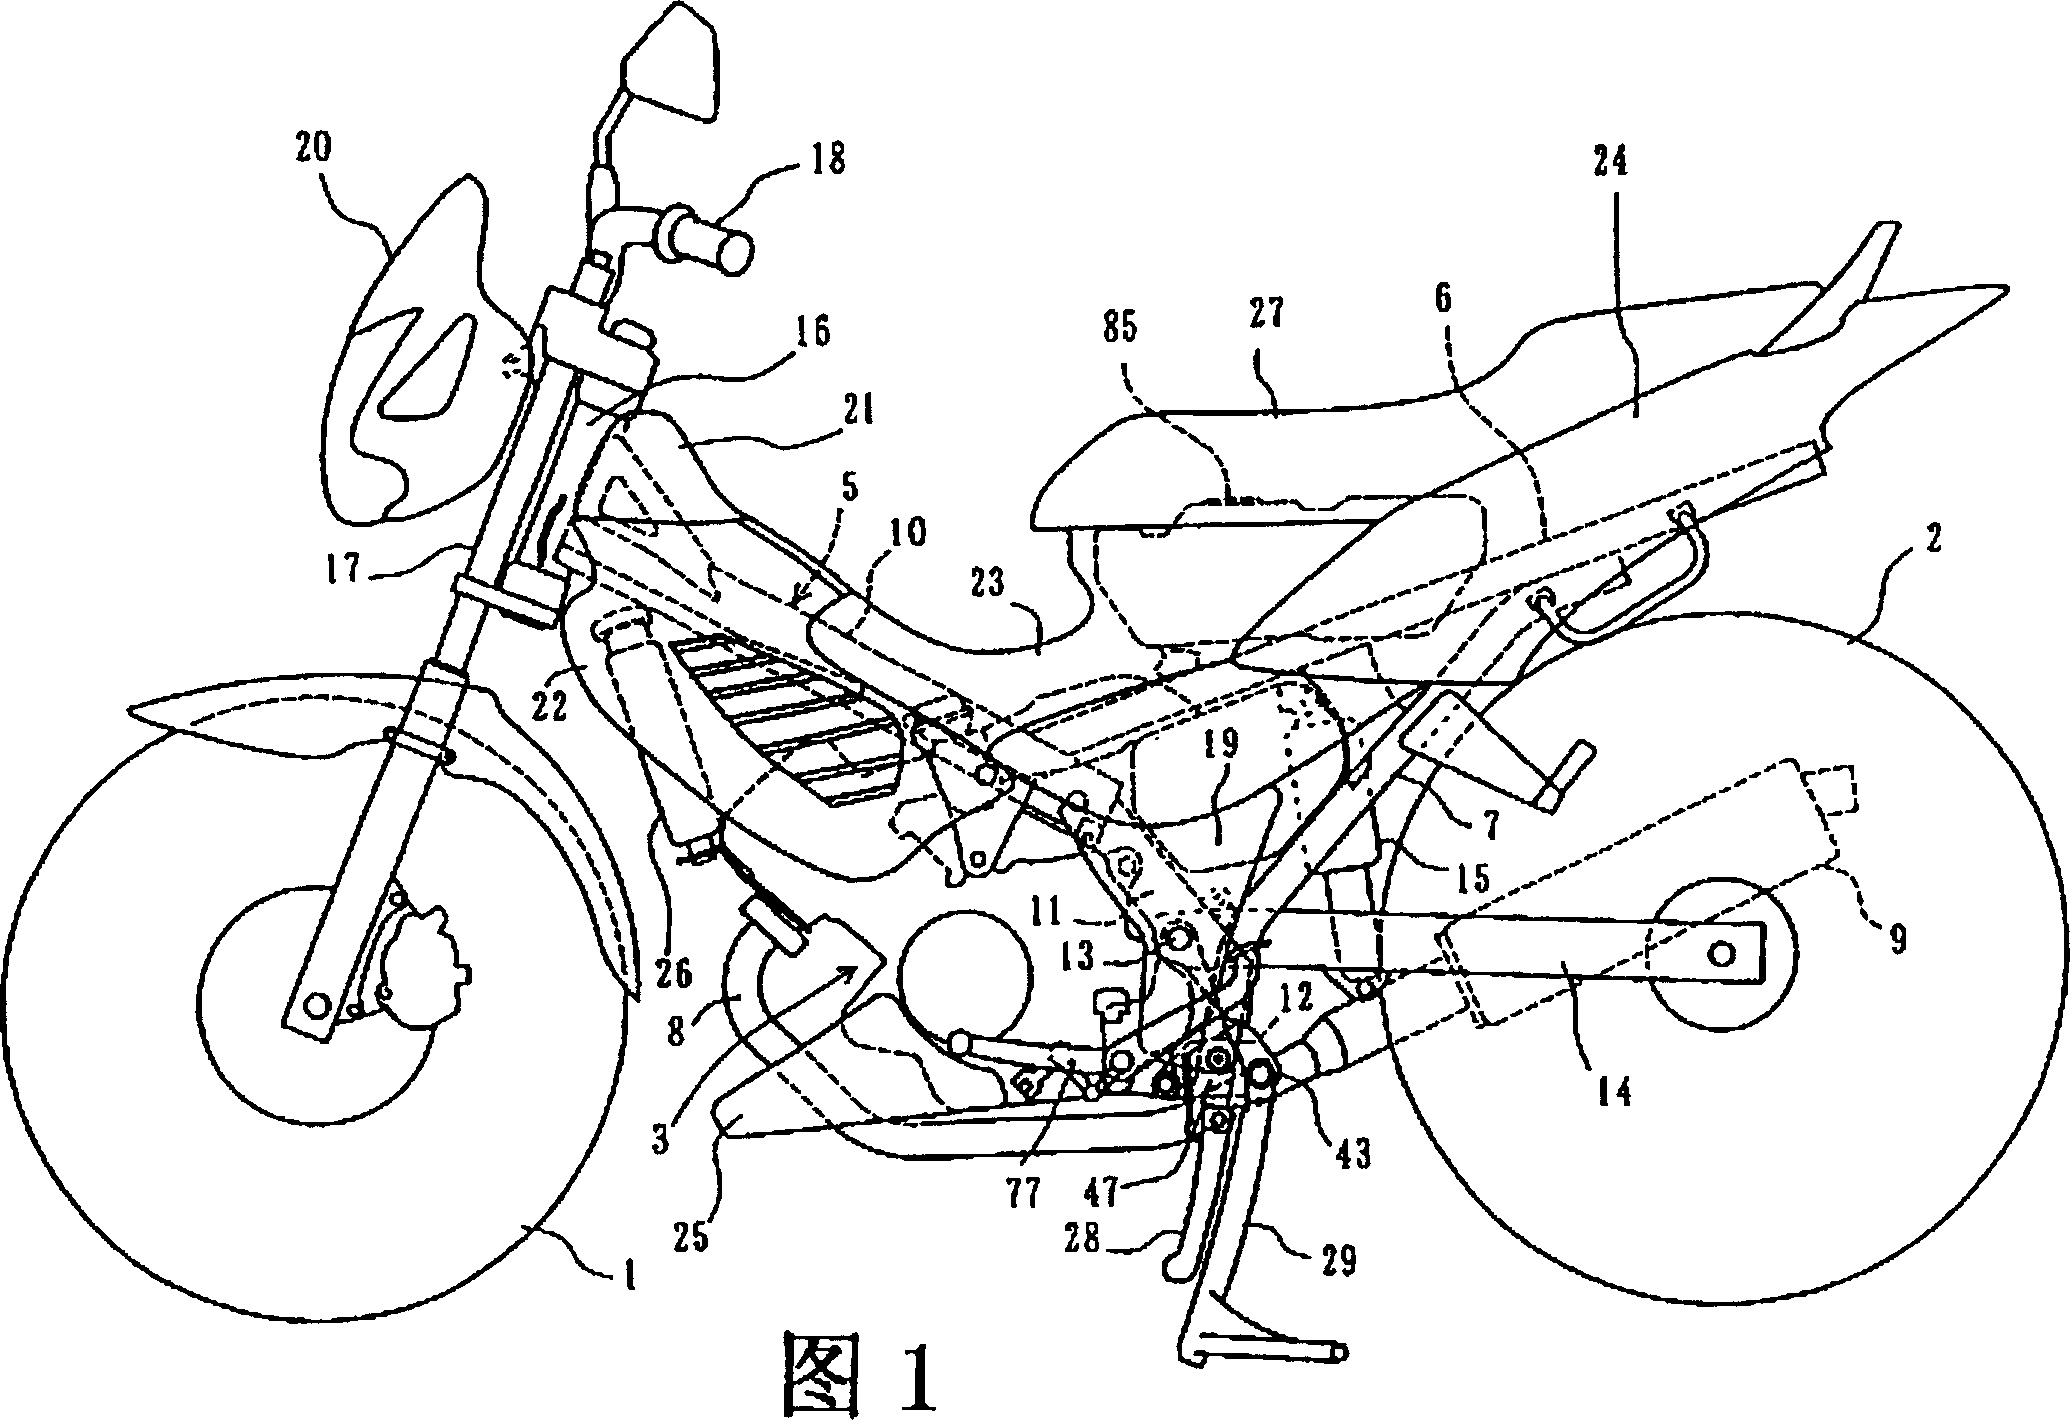 Frame structure of motor bicycle